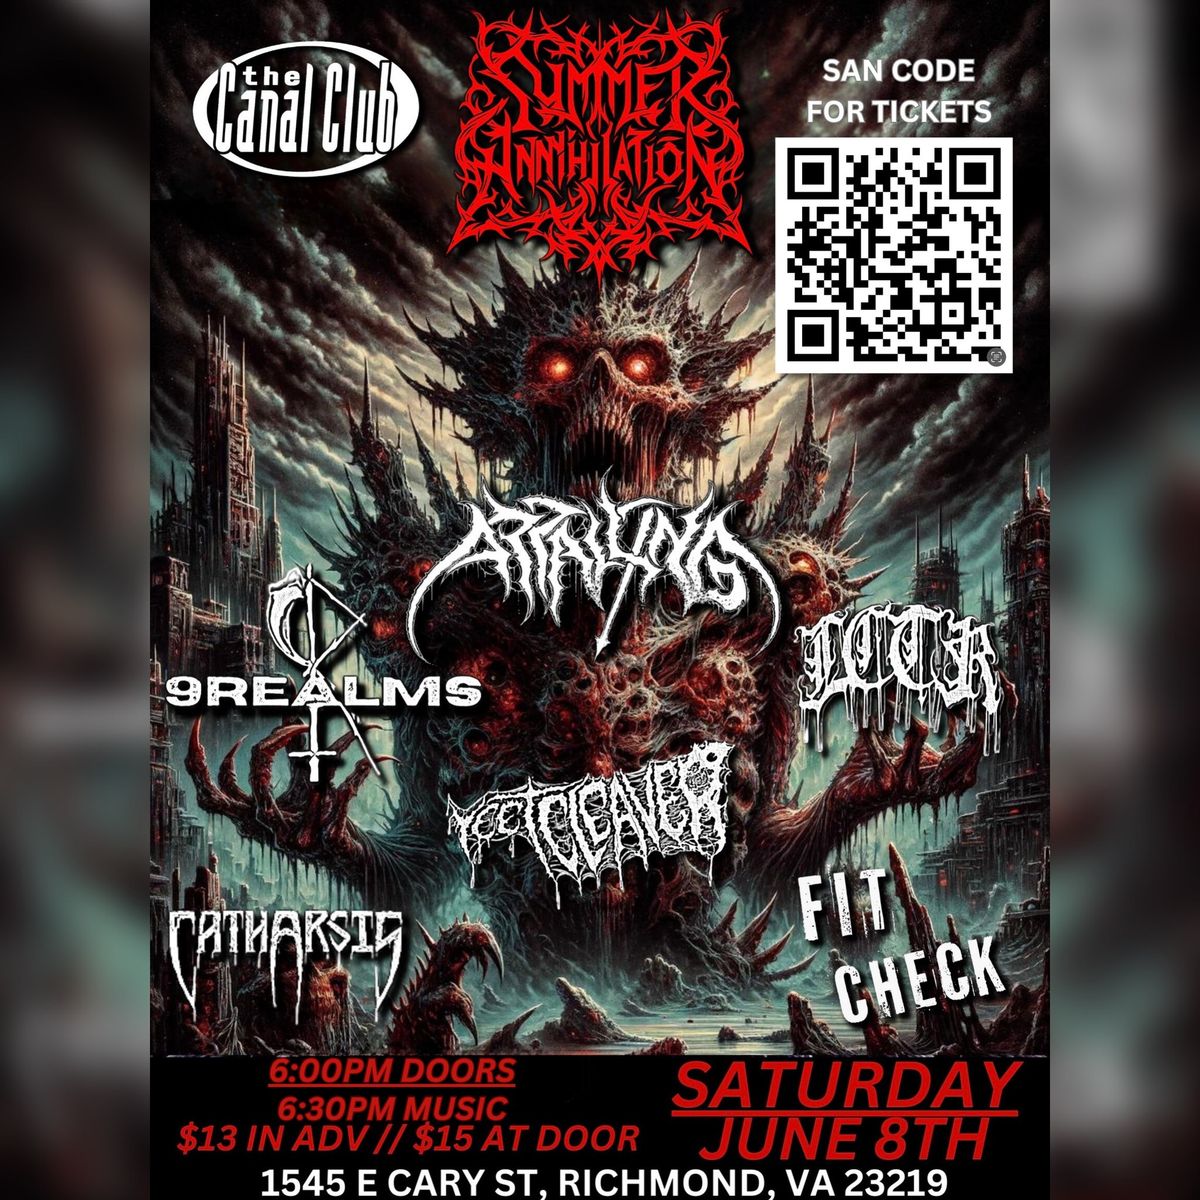 Saturday June 8th Summer Annihilation at Canal Club with Appalling, 9 Realms, LCTR AND MORE